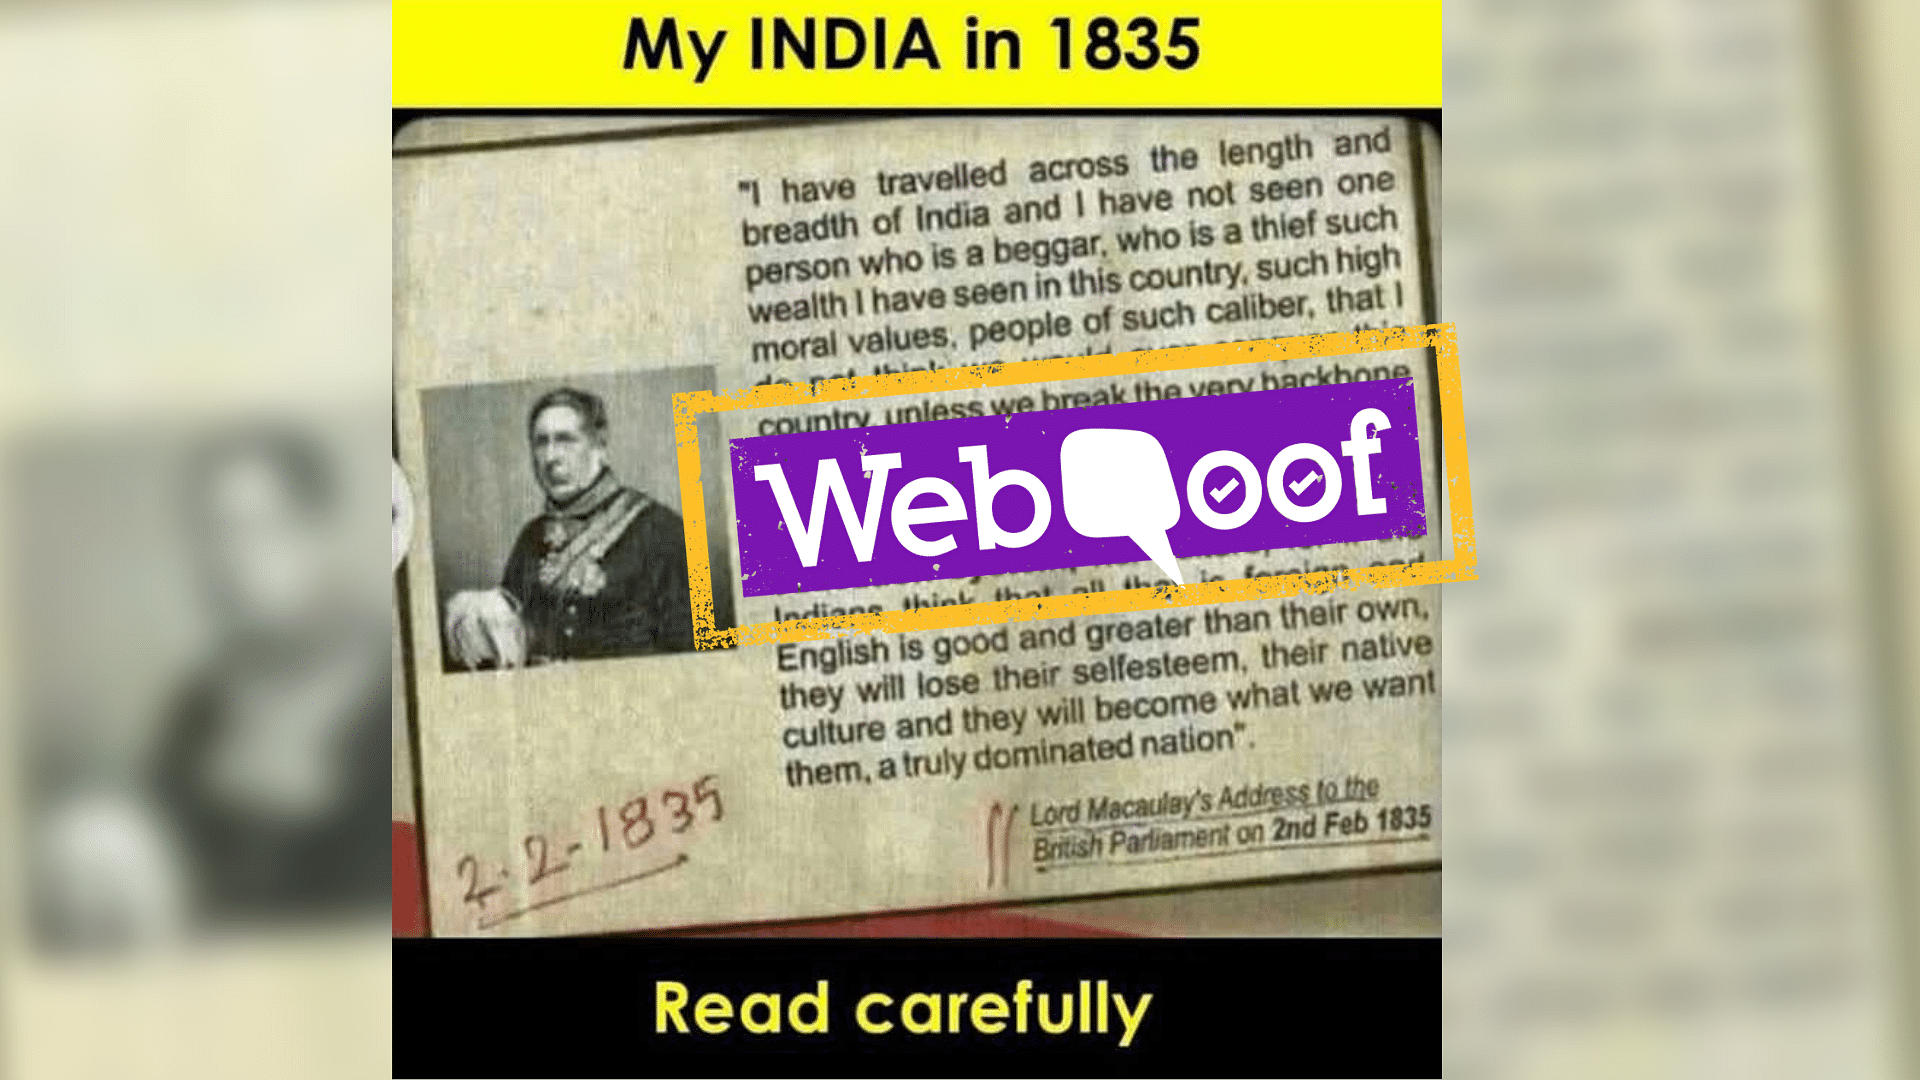 A viral post falsely claims that Lord Macaulay opined on India’s culture while addressing the British Parliament on 2 February 1835.